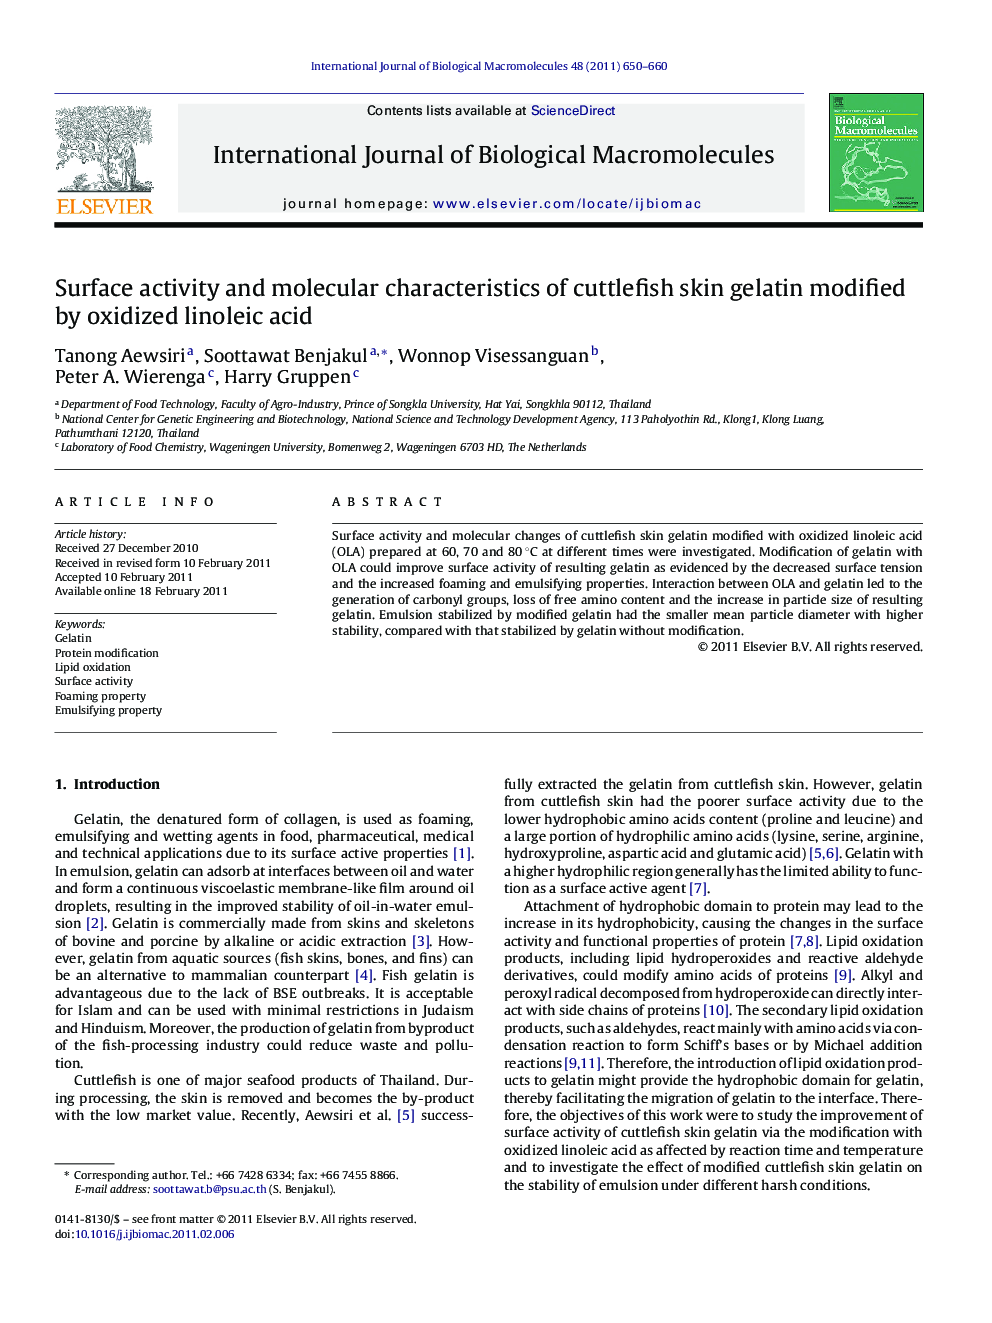 Surface activity and molecular characteristics of cuttlefish skin gelatin modified by oxidized linoleic acid